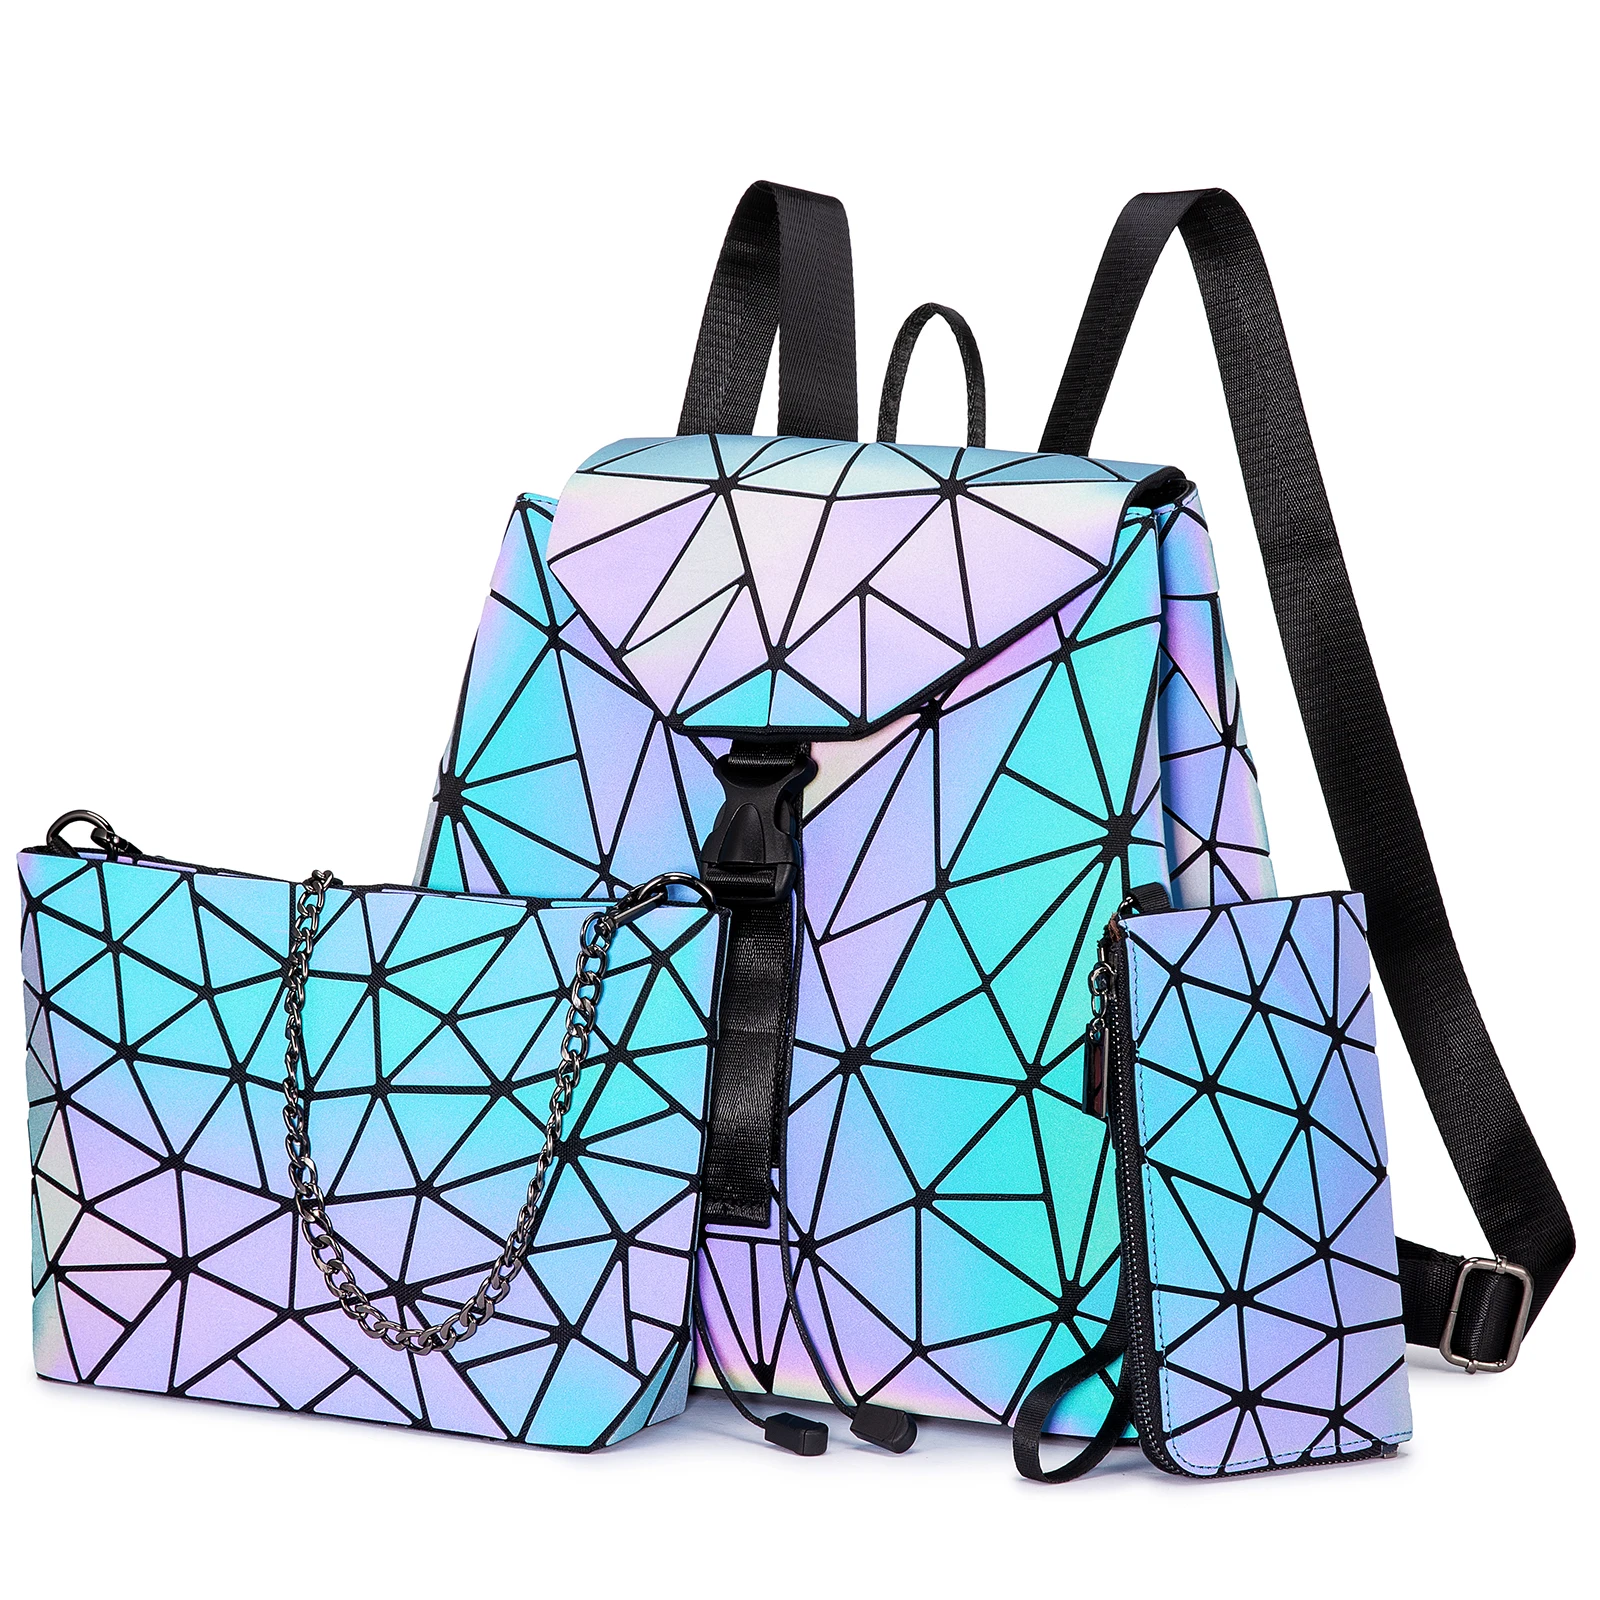 Geometric Luminous Purses and Handbags for Women Holographic Backpack Reflective Bag Wallet Clutch Set 